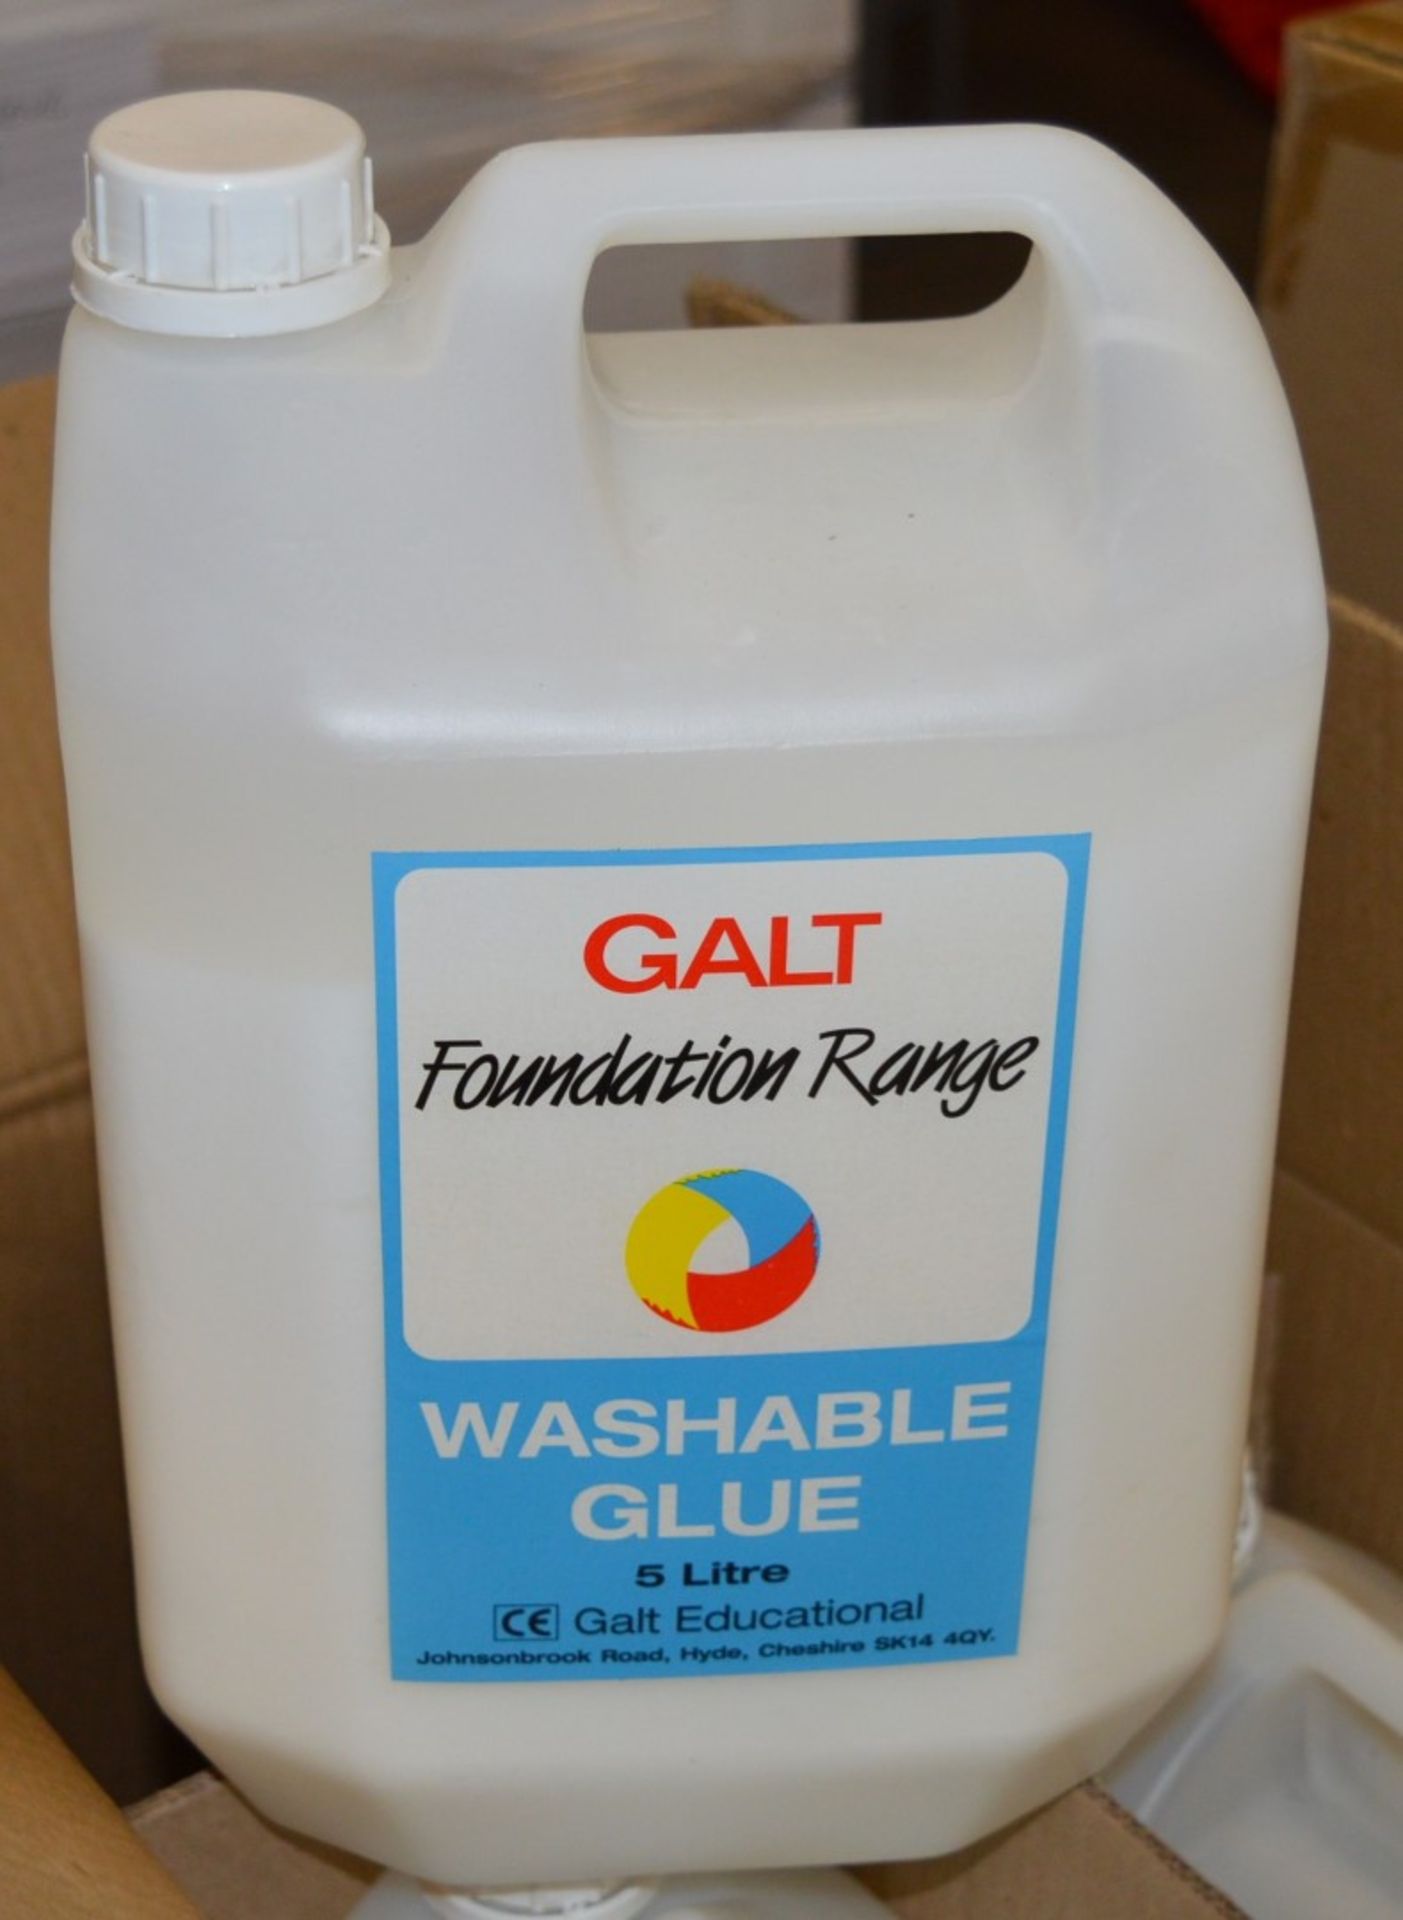 4 x Foundation Range Washable Glue - 5 Litre Containers - Brand New Stock - CL185 - Ref DRT0027 -